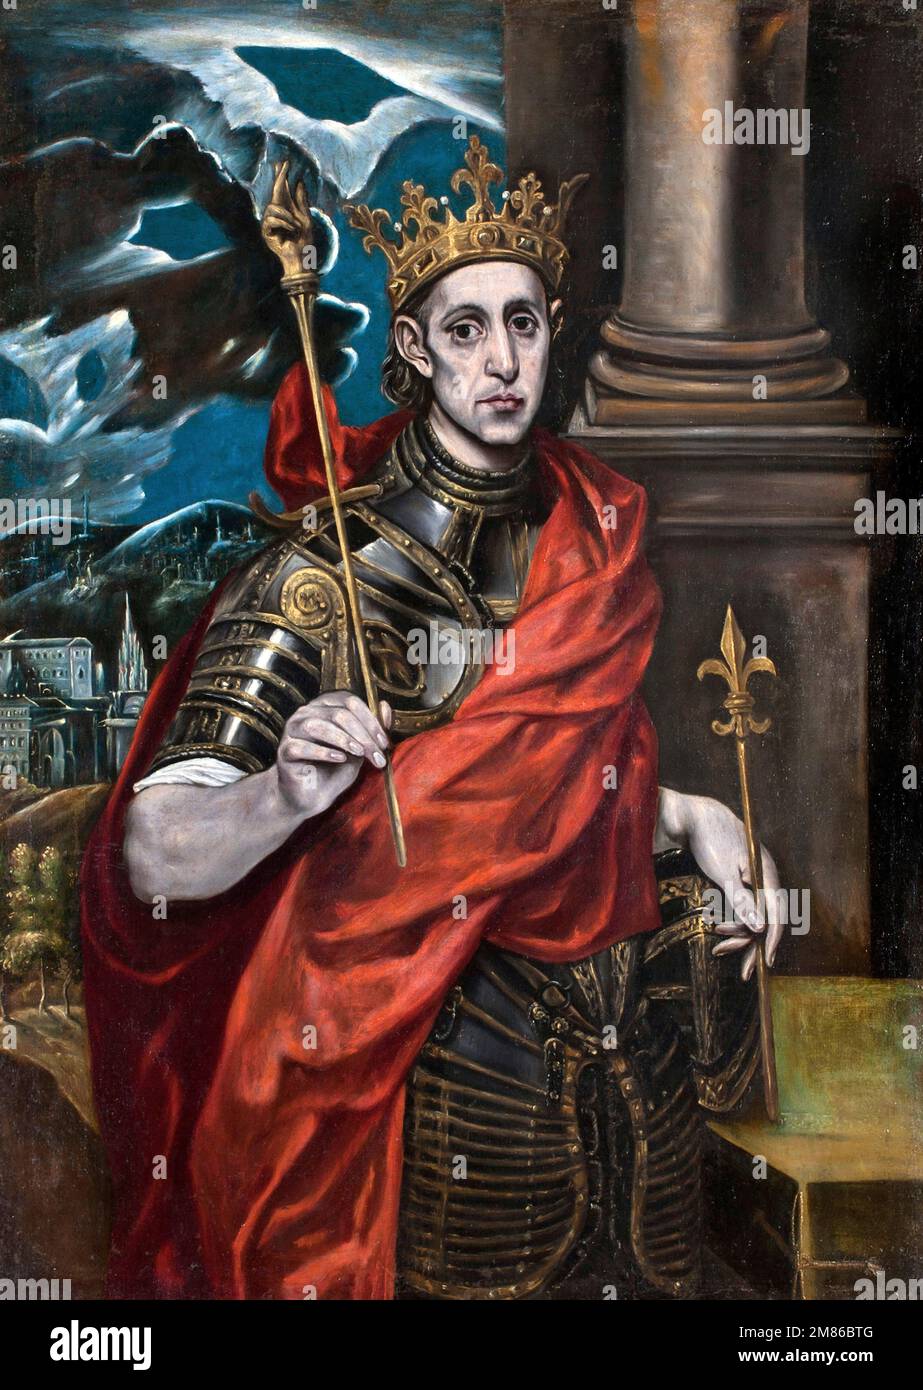 Louis IX (1214-1270). Painting entitled 'Saint Louis, King of France' by El Greco (1541-1614), oil on canvas, c. 1705-10 Stock Photo